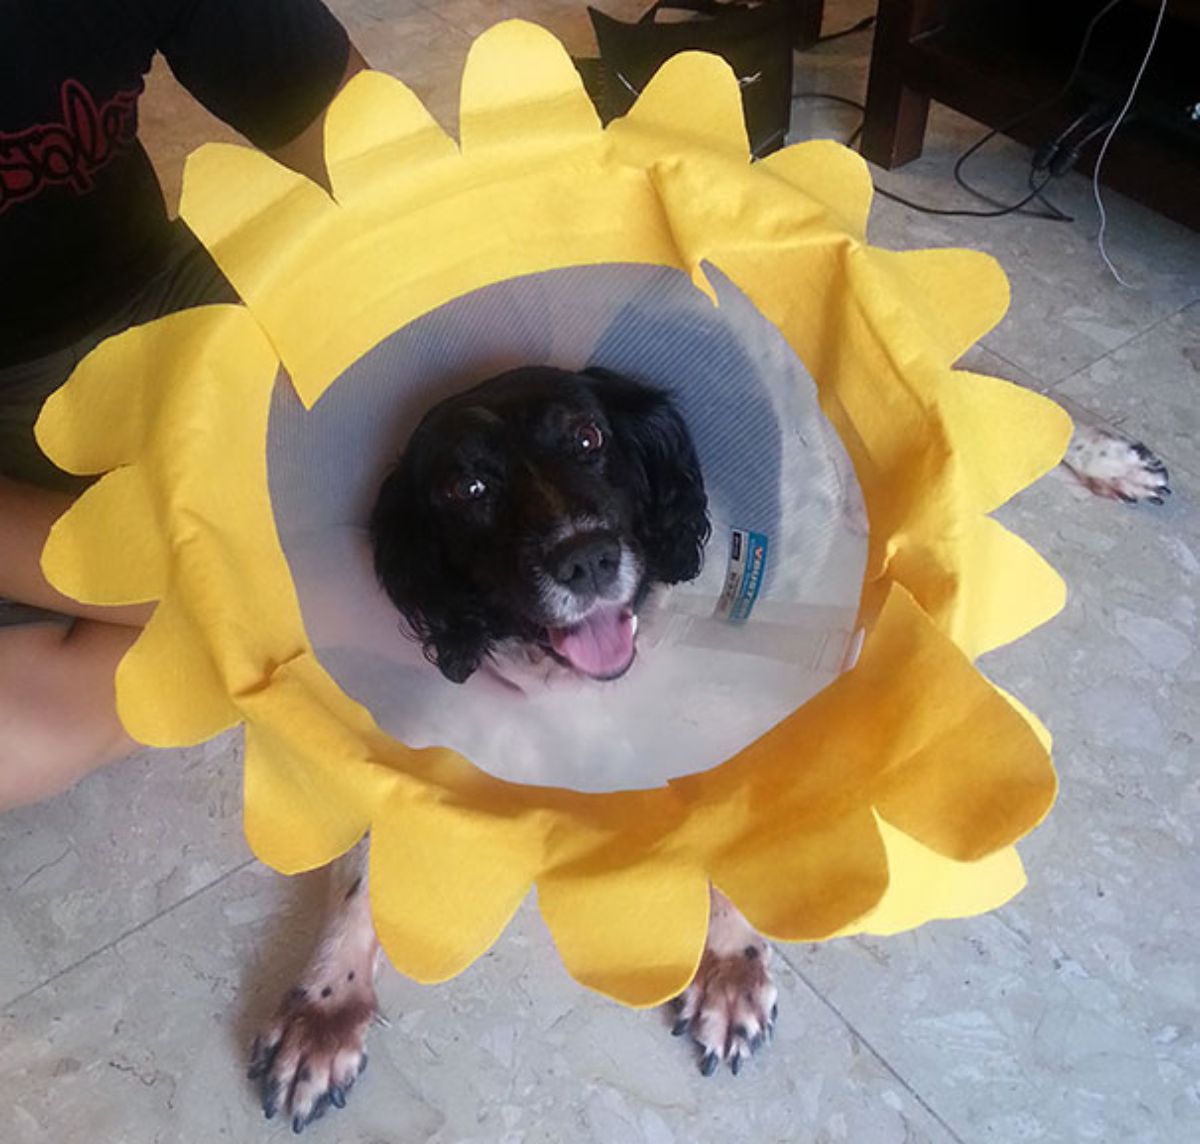 black and white smiling dog wearing a cone of shame with yellow flower petals pasted on the outer rim